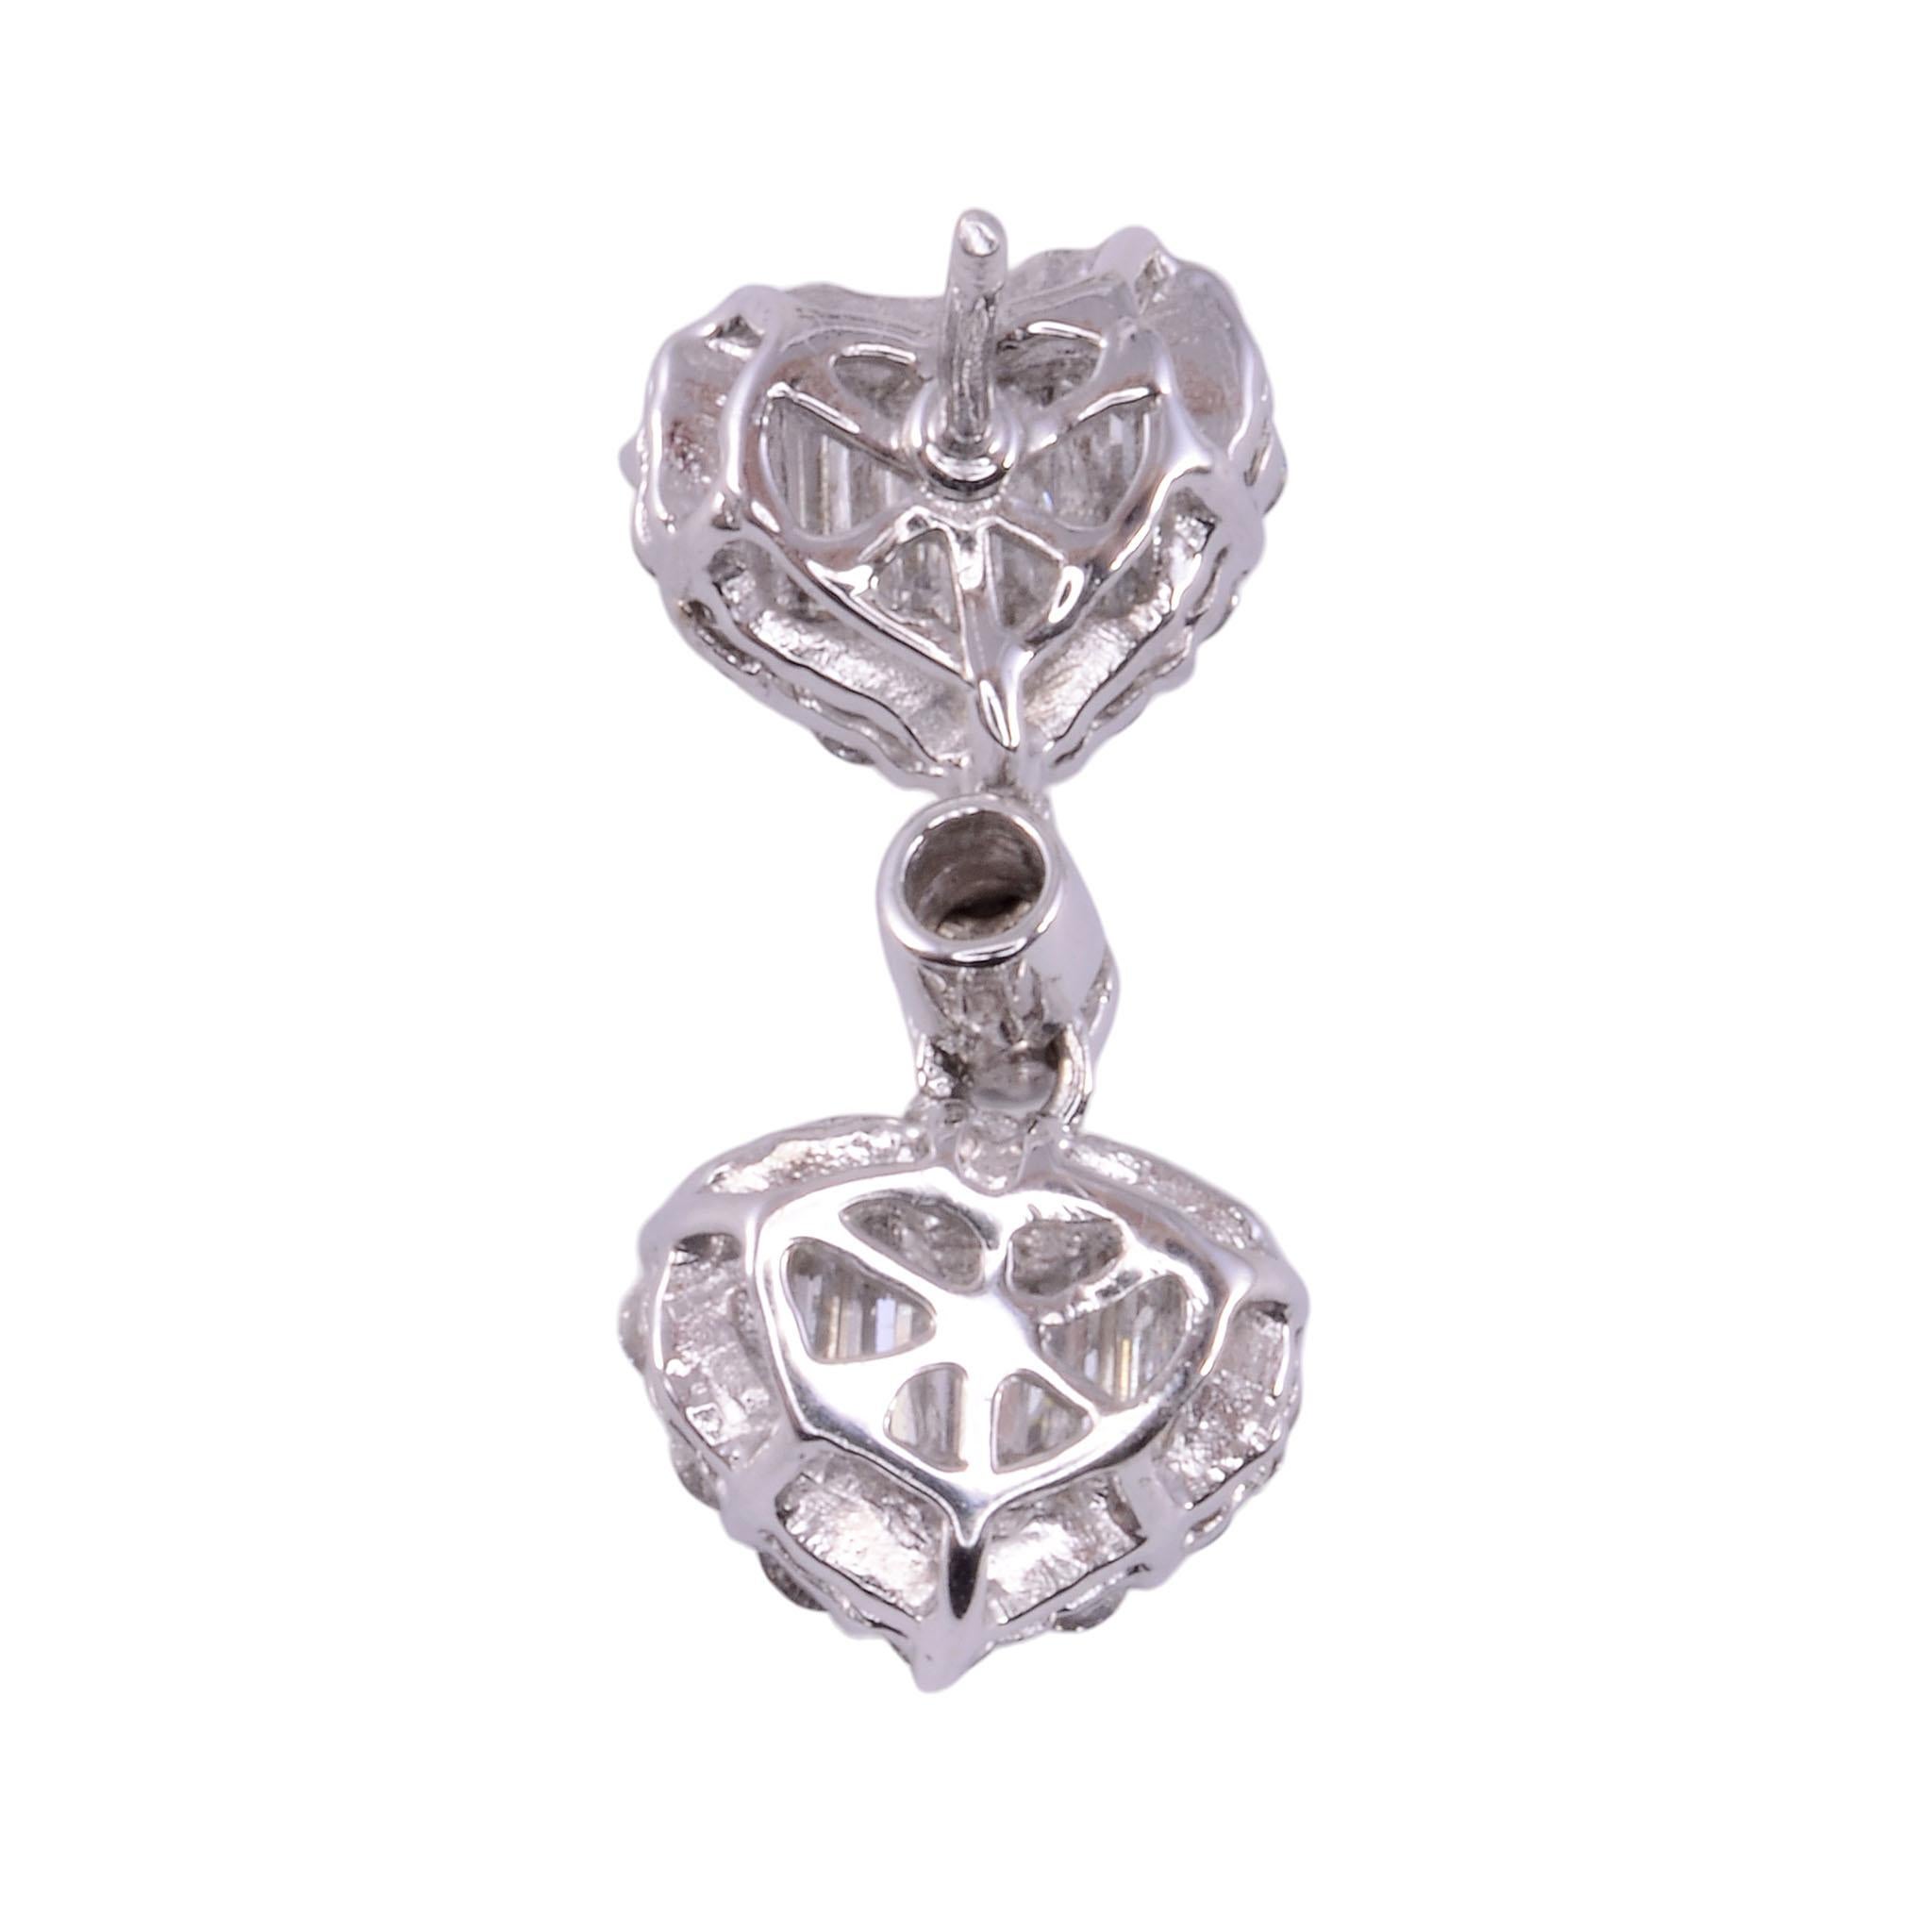 Estate diamond heart motif earrings. These 14 karat white gold rhodium plated heart motif earrings feature 3.0 carat total weight of diamonds. There are 50 round brilliant diamonds at 1.70 carat total weight, along with 16 straight baguettes at 1.30